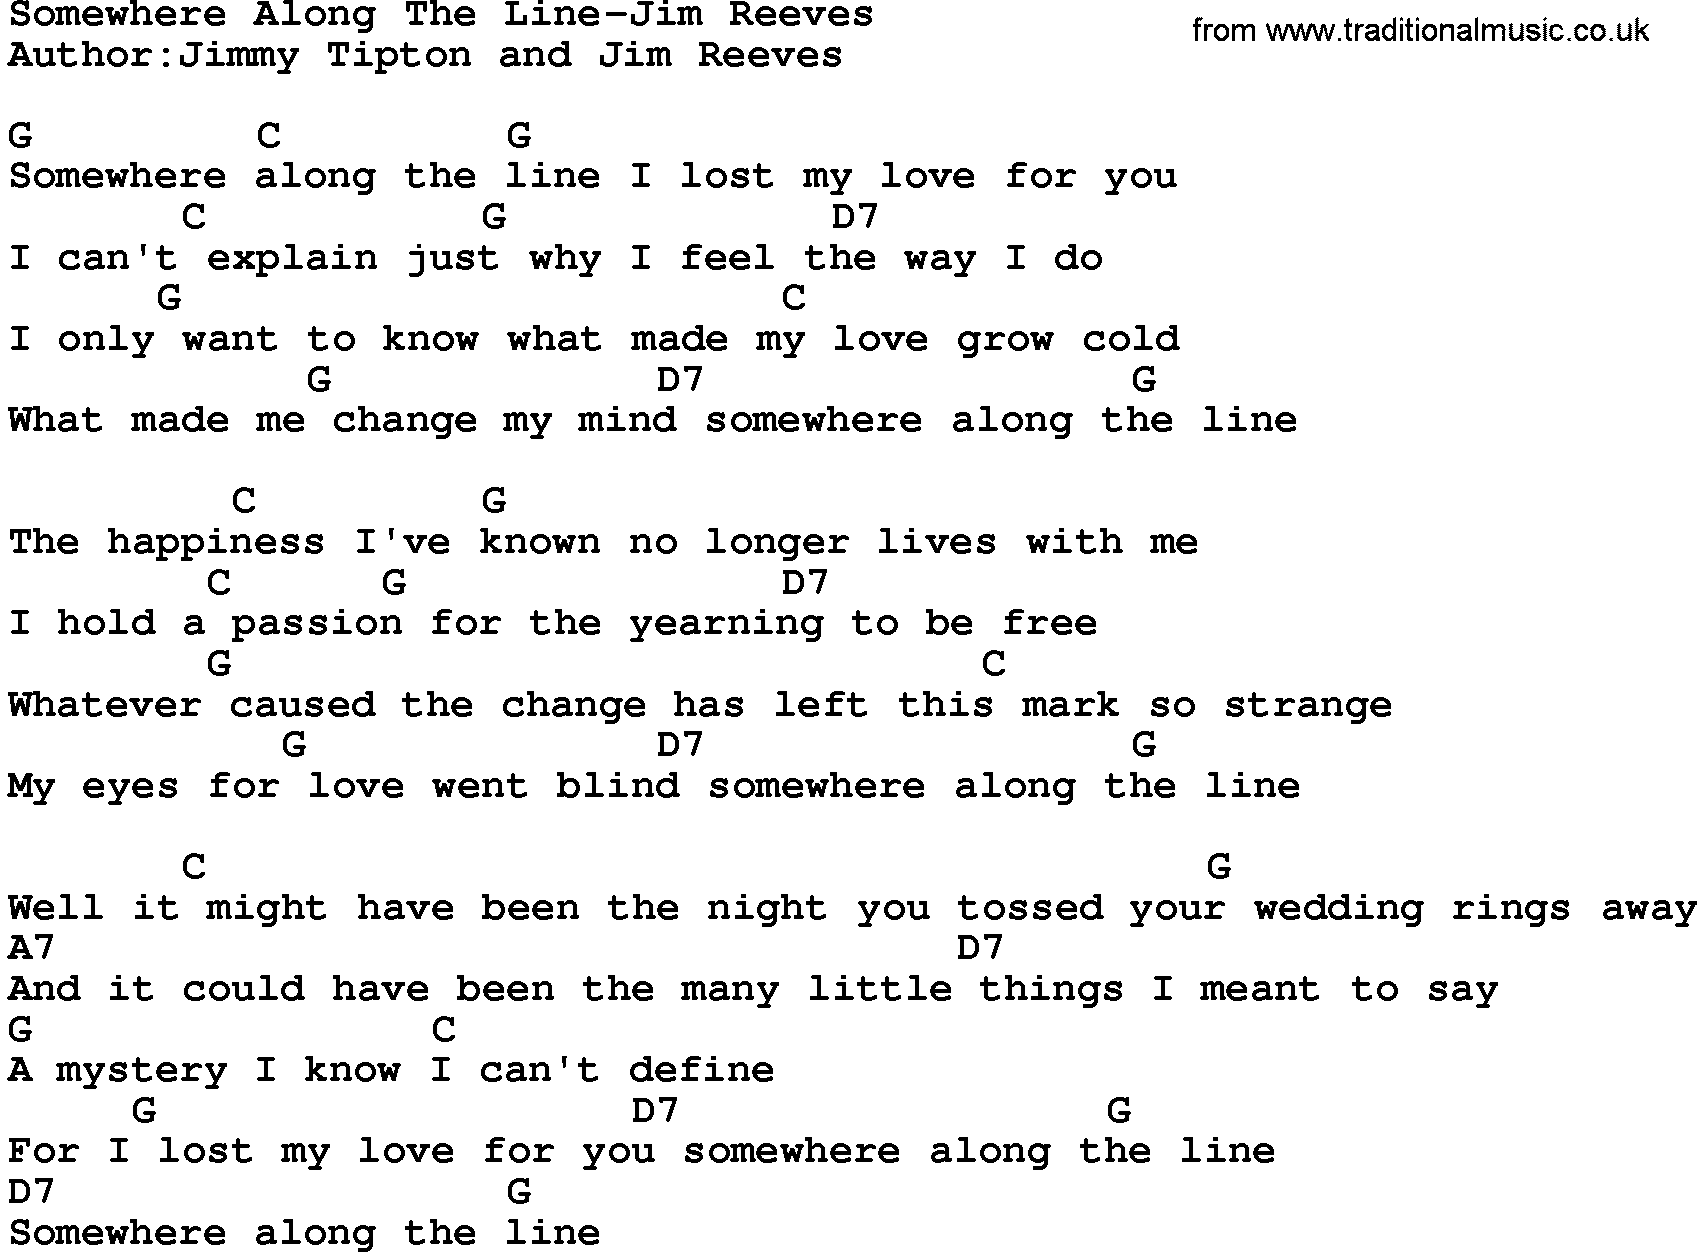 Country music song: Somewhere Along The Line-Jim Reeves lyrics and chords